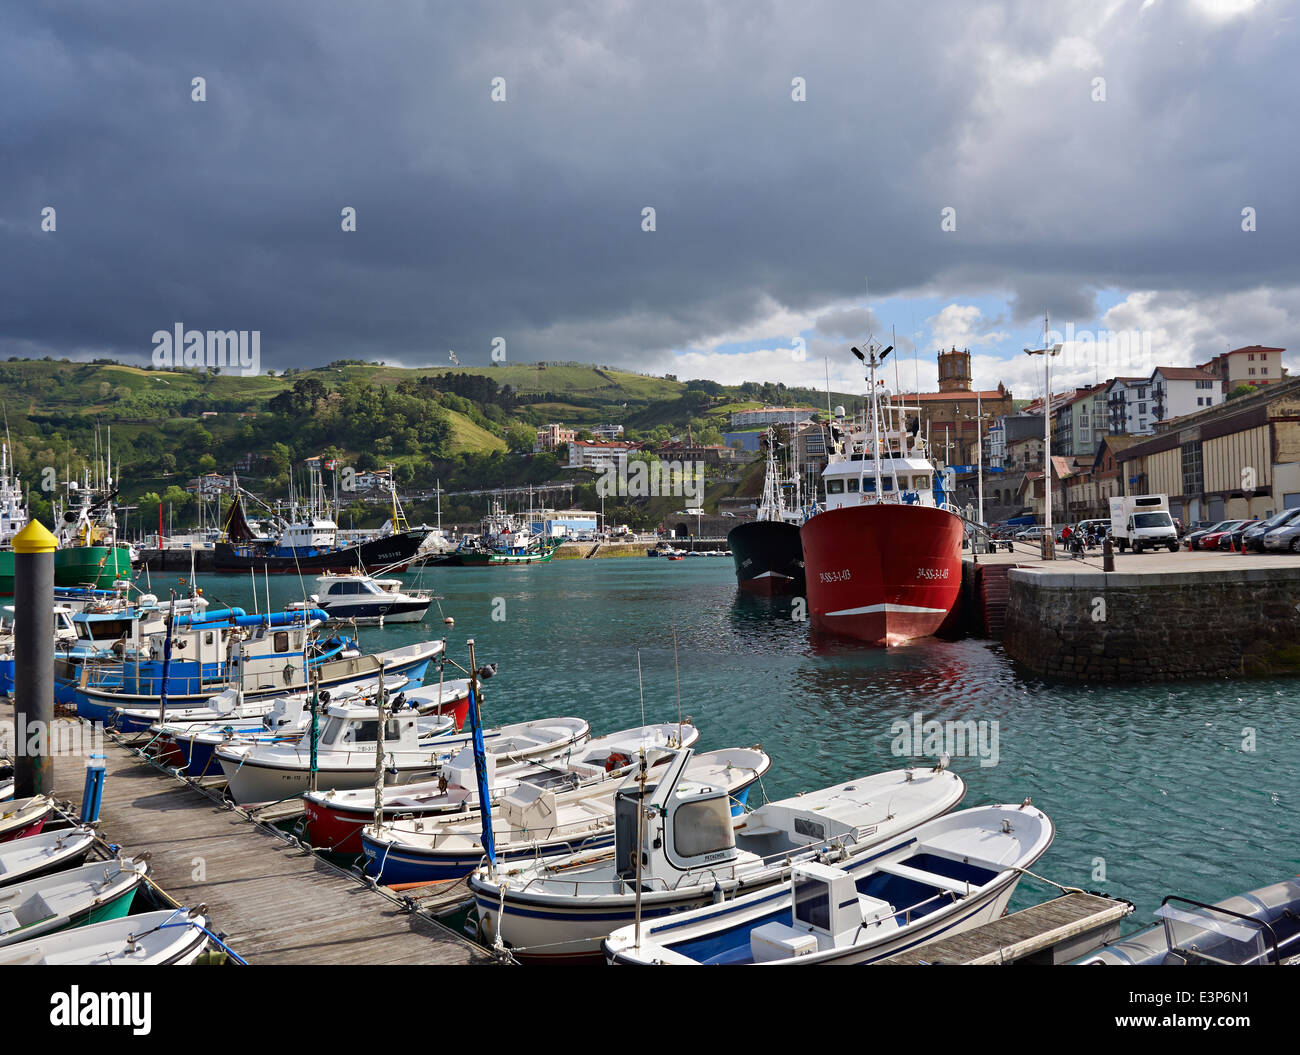 Getaria, Gipuzkoa, Basque Country. Busy fishing port. Spain has the largest commercial fishing fleet in the European Union. Stock Photo